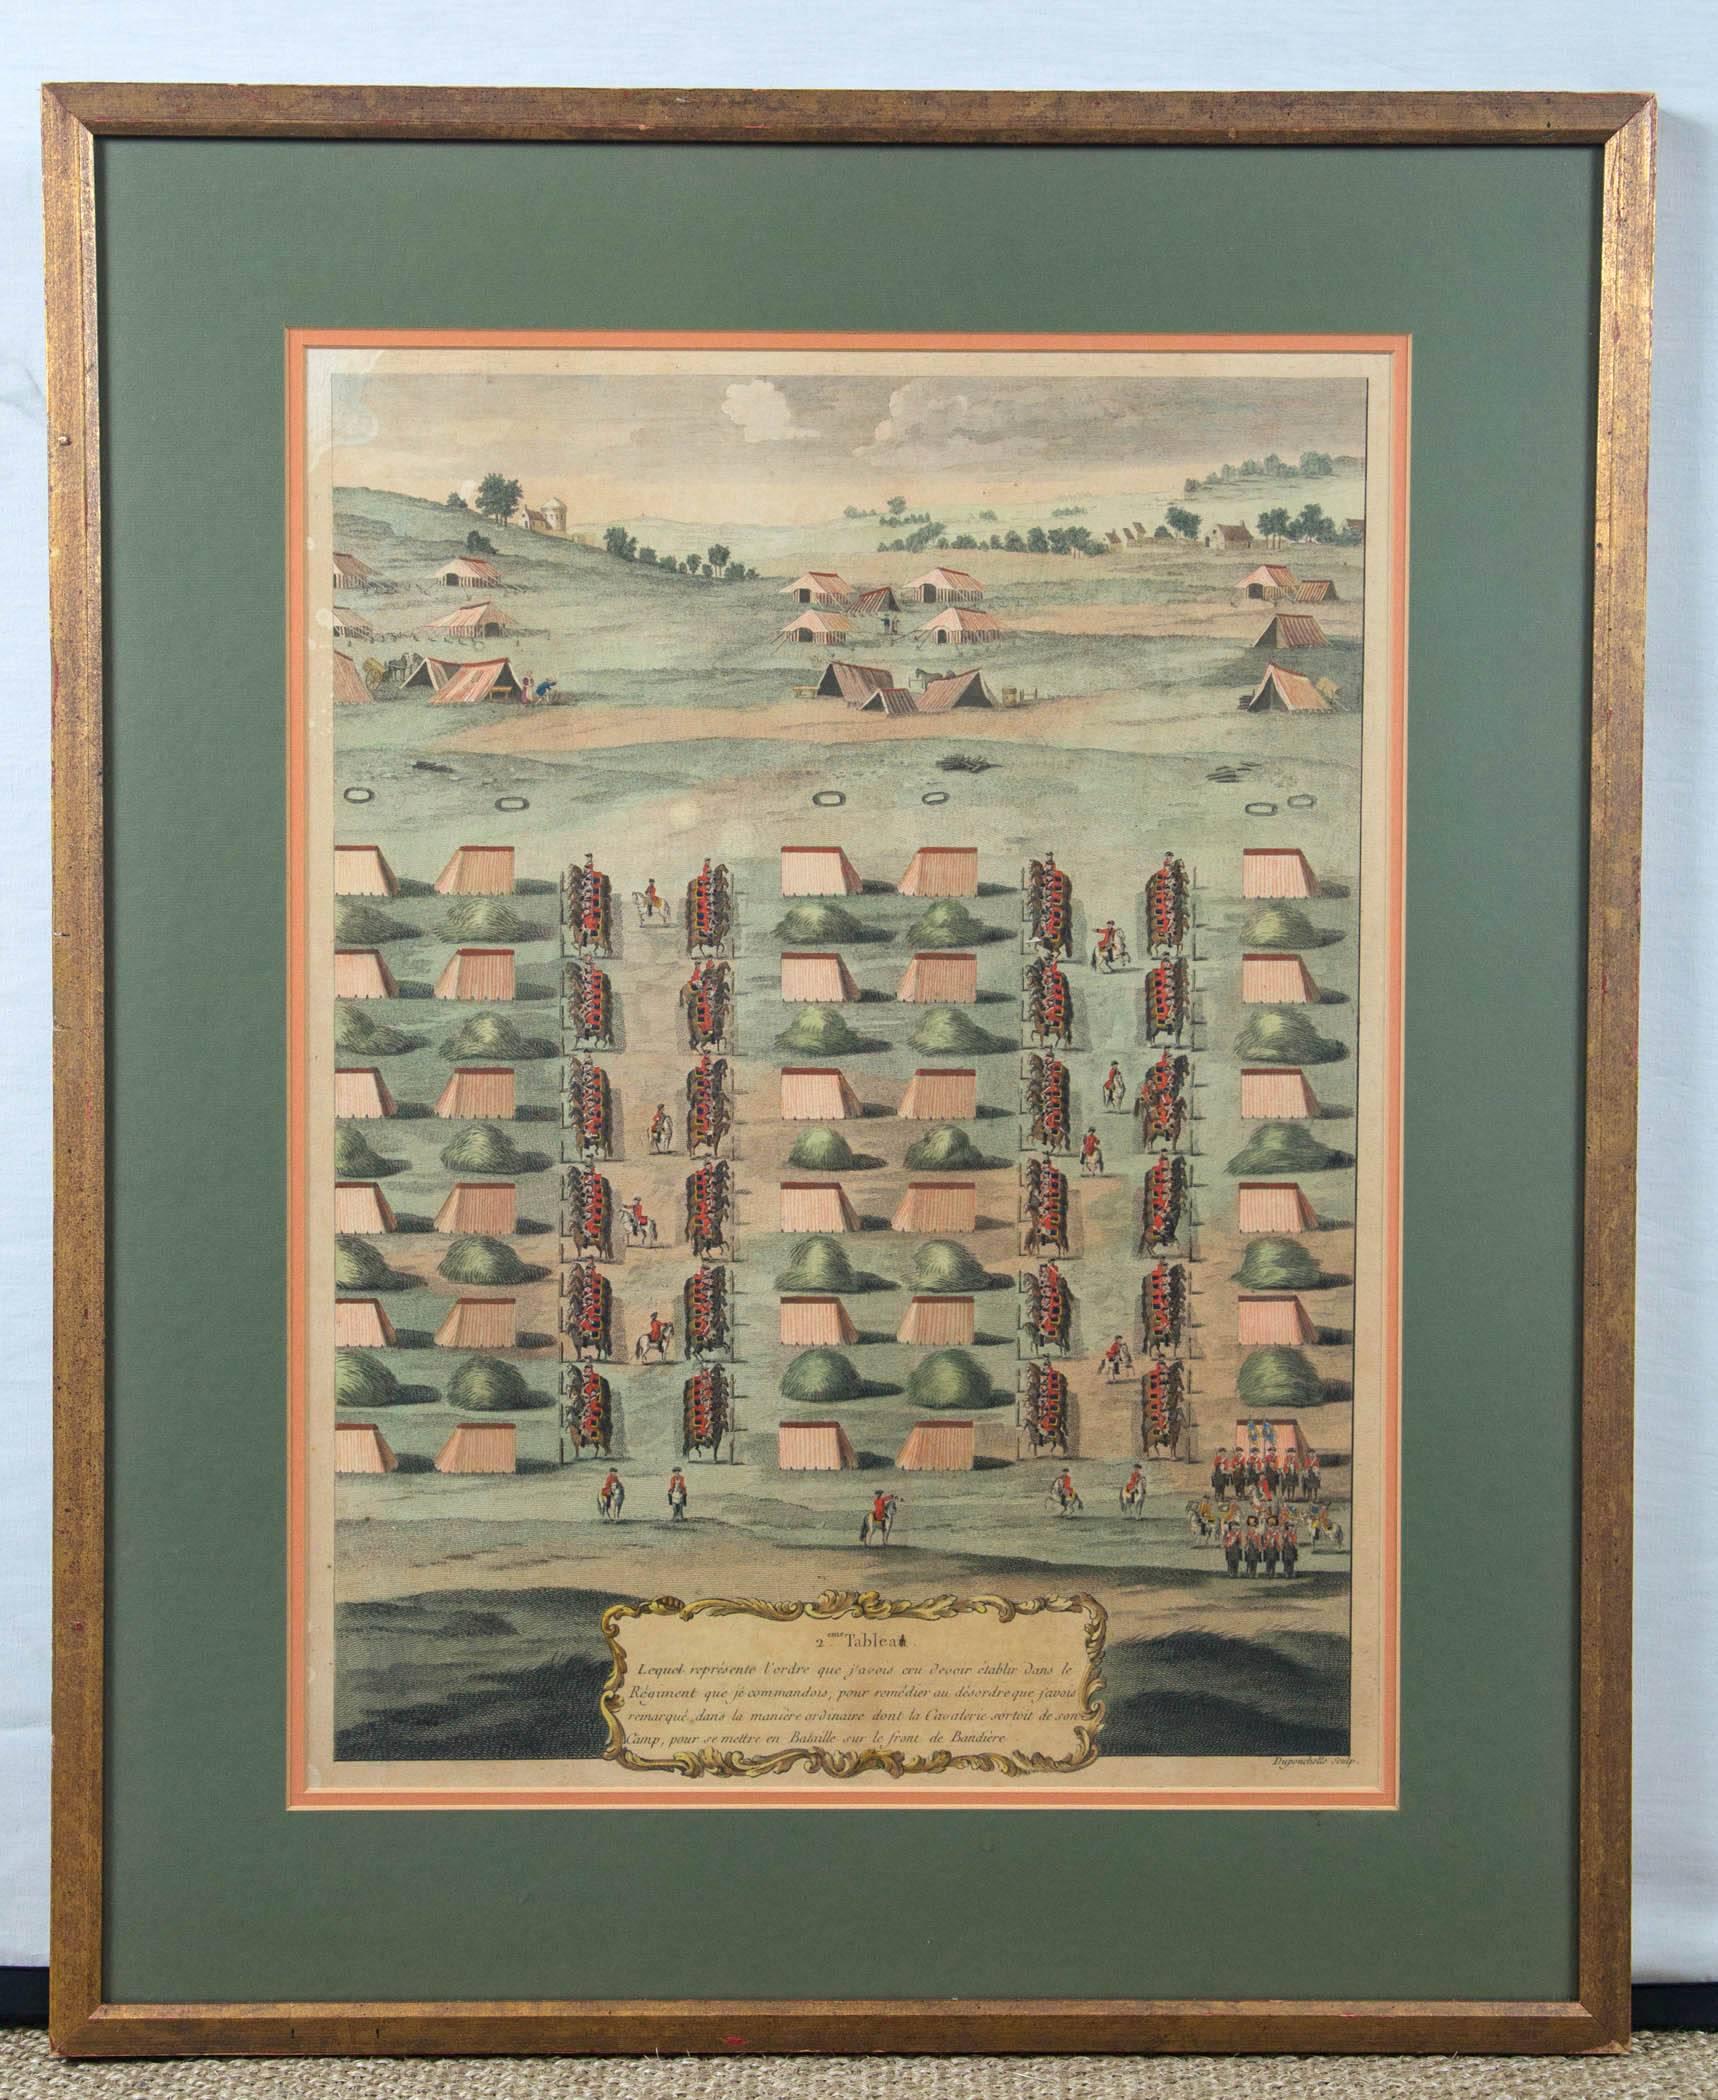 Framed French Cavalry Lithograph, late 19th Century. Hand-colored print depicting a military landscape. Part of a series of prints, signed by Duponchette sculpt. Custom frame and double mat.